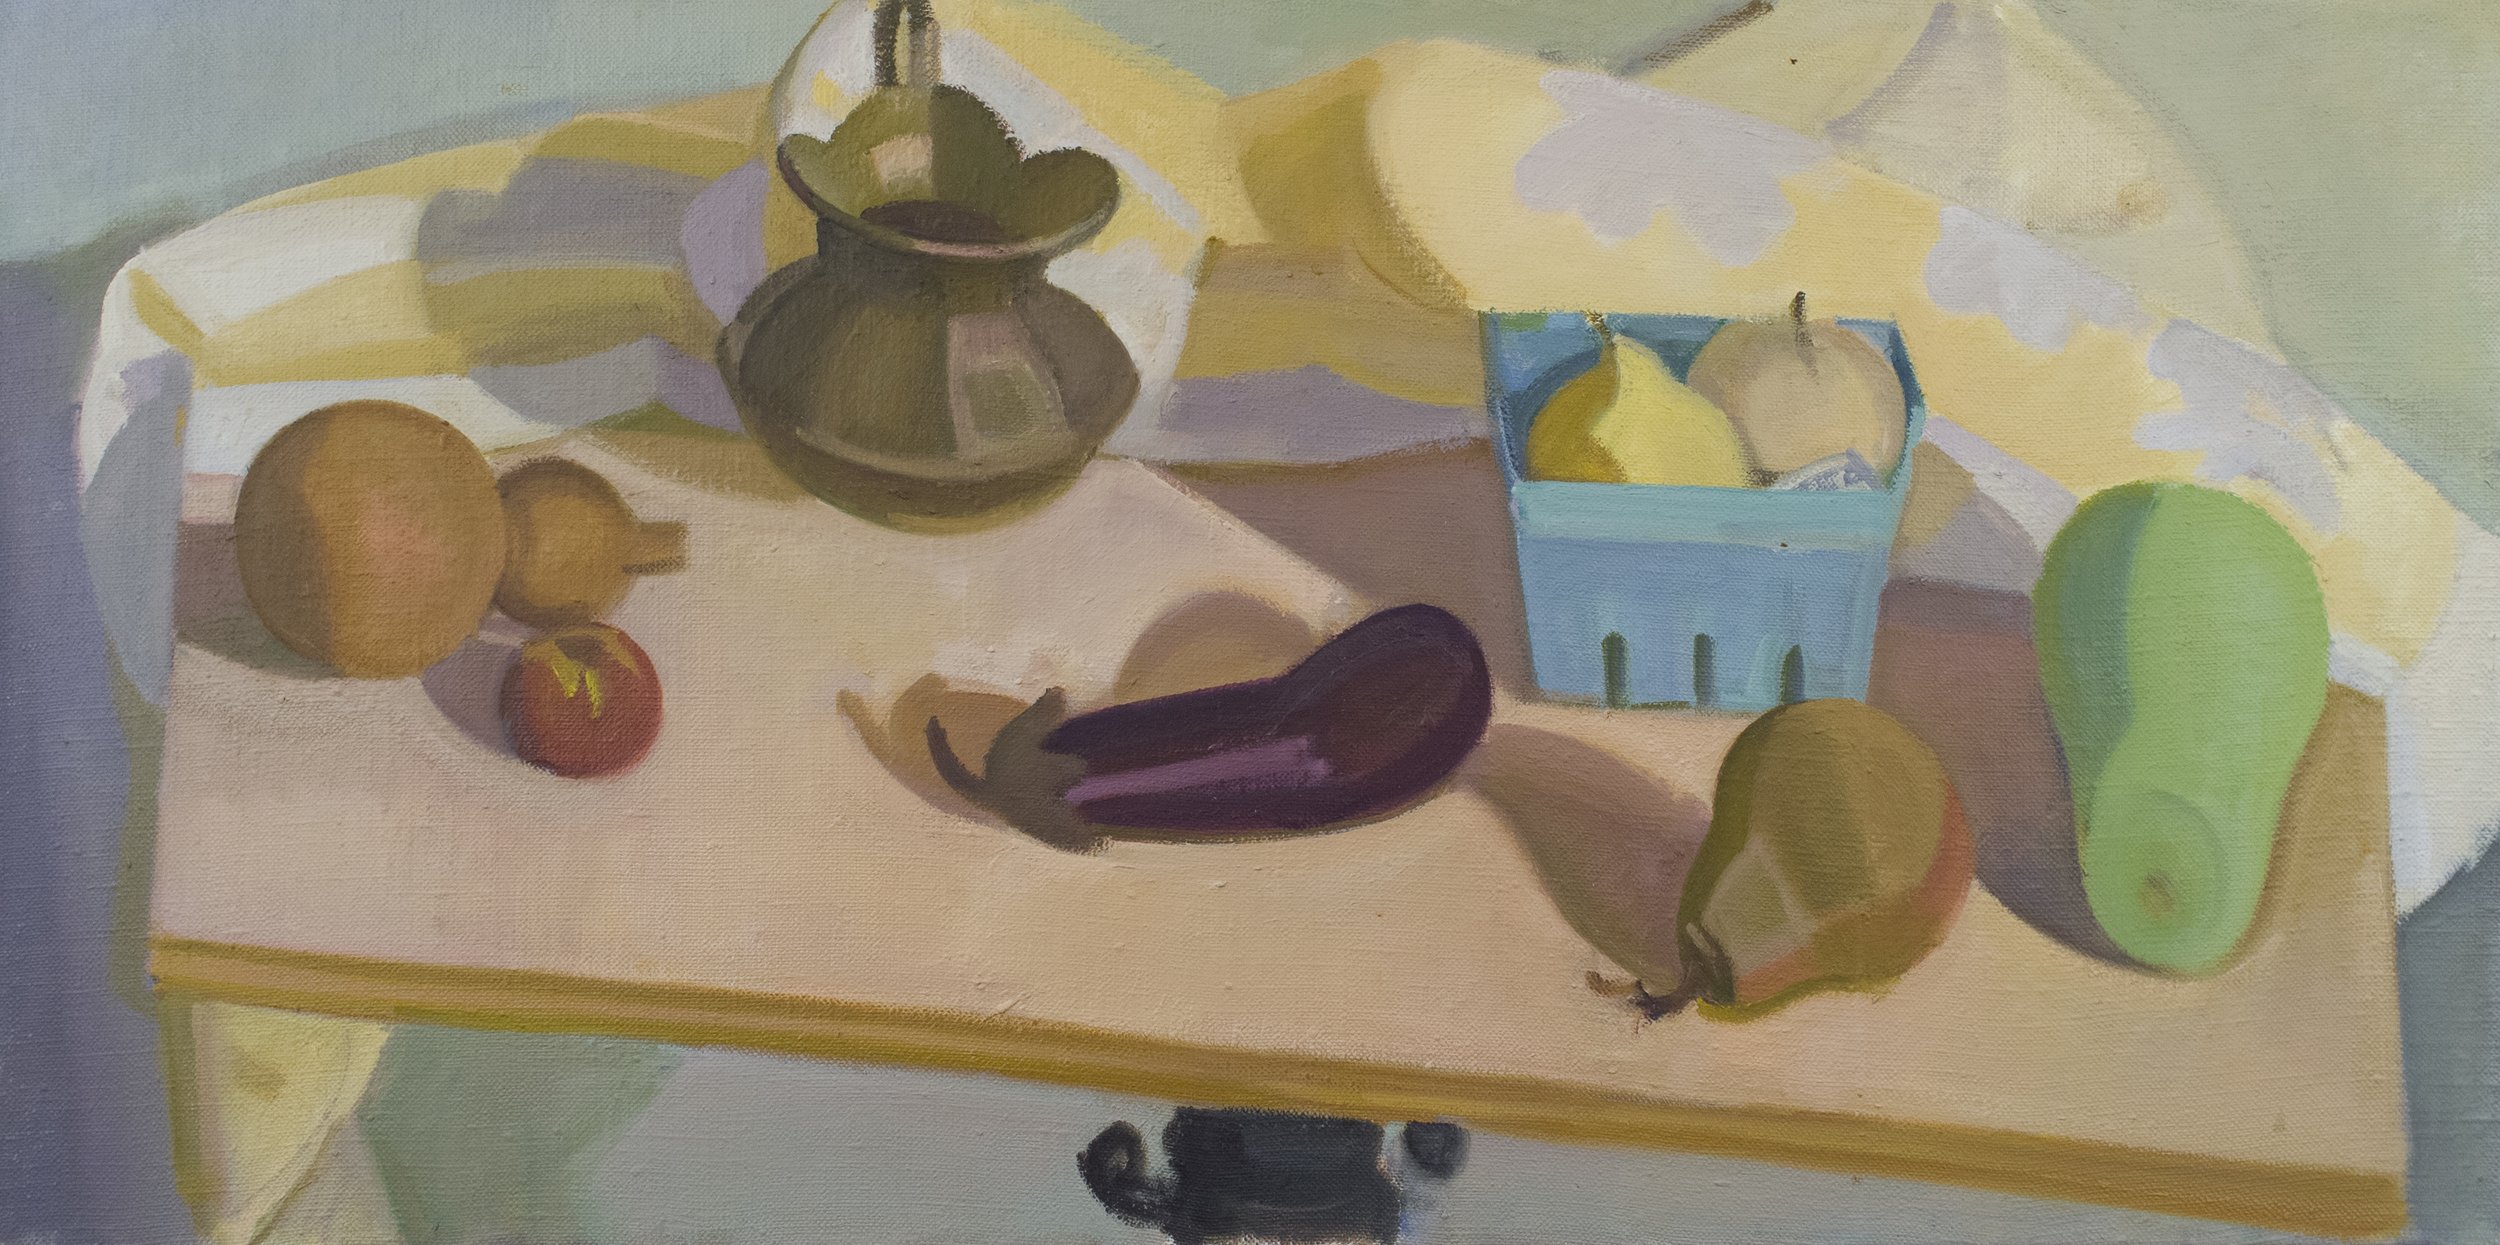   Brass Pitcher and Chinese Pears in Fruit Box , 2008, oil/canvas (unframed), 16 x 32 in., $2,500 